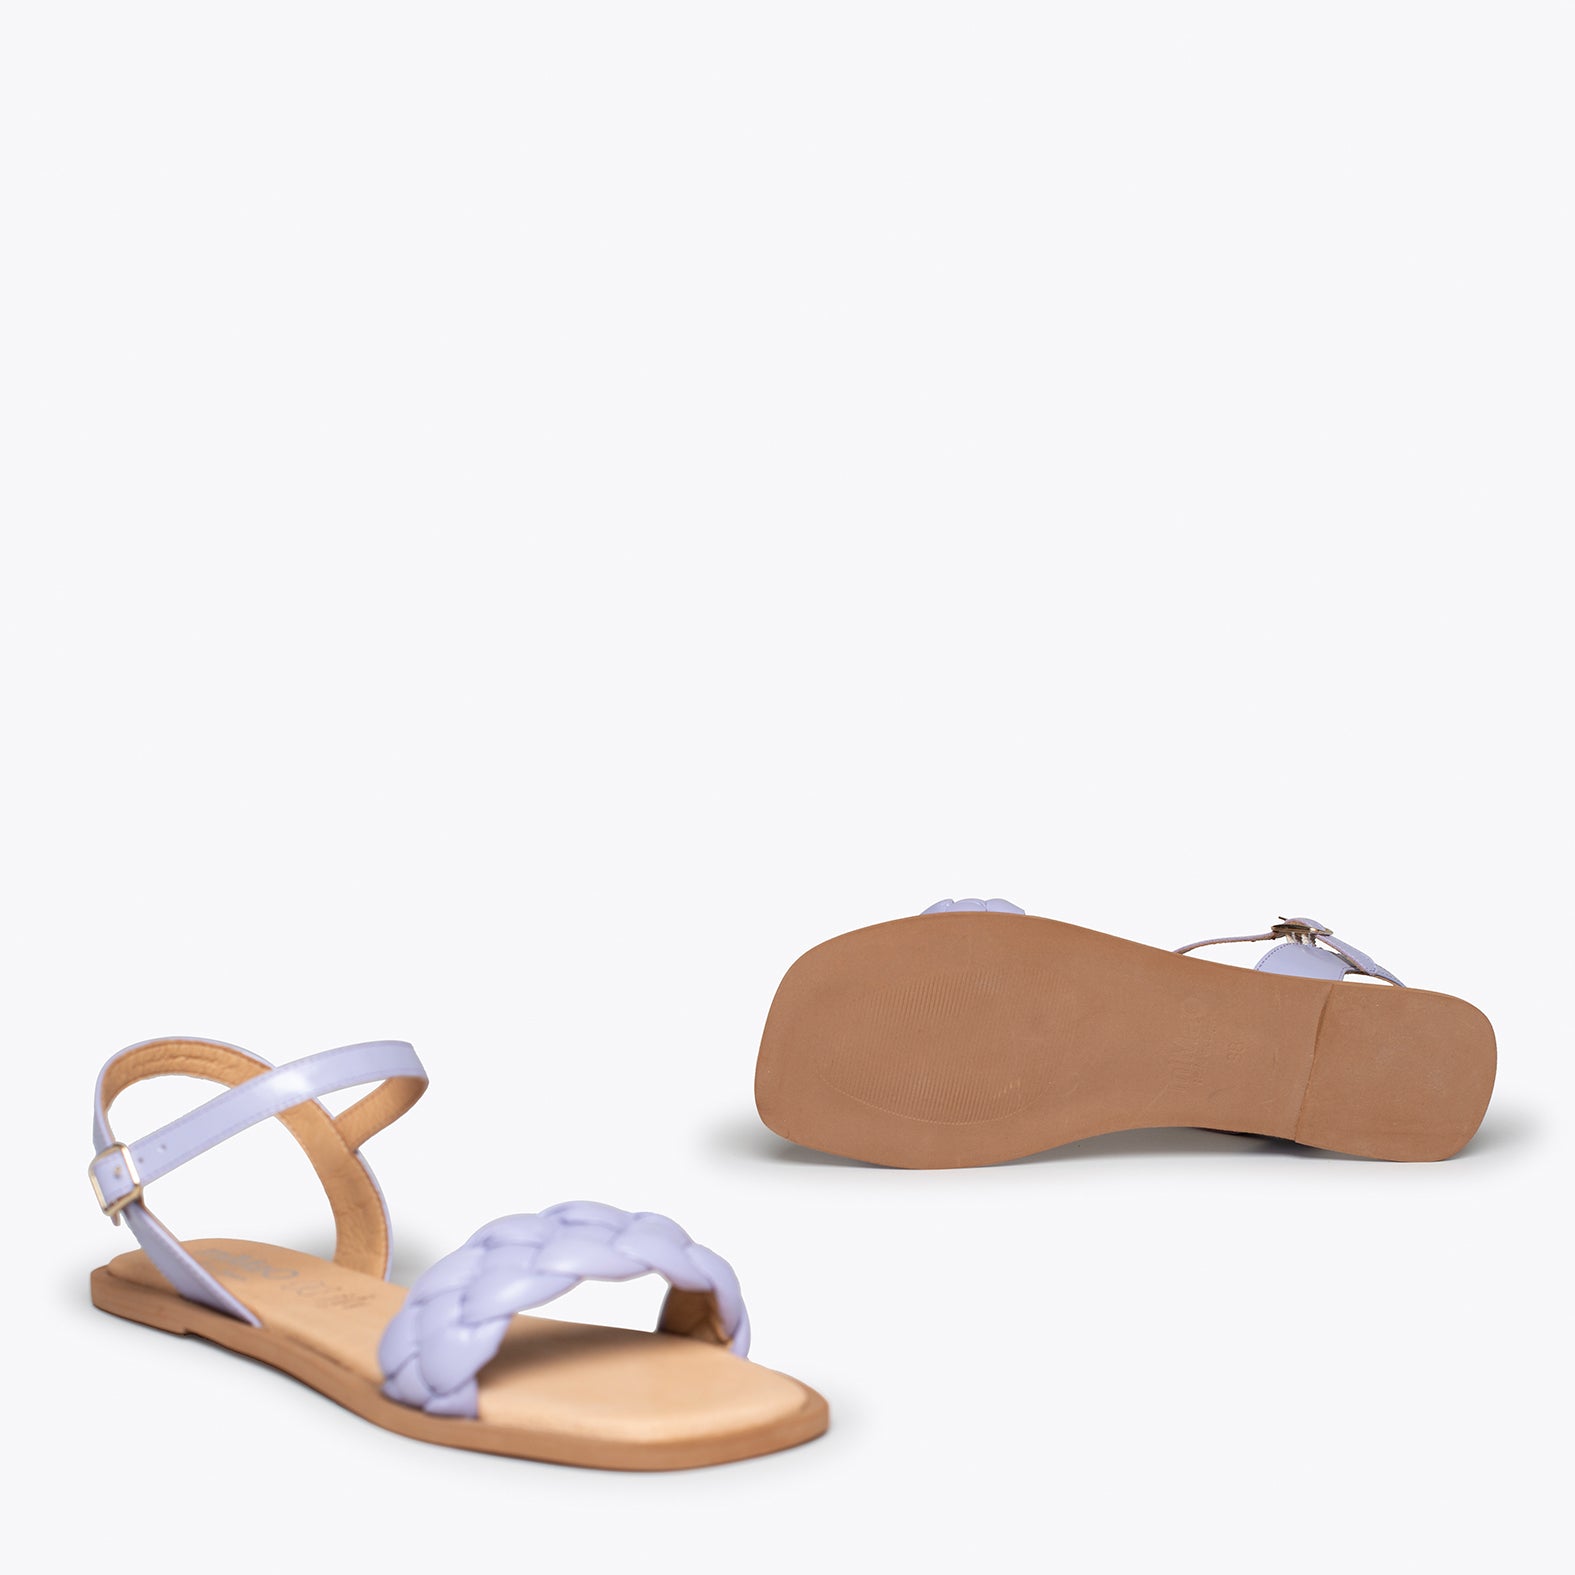 MARBELLA – LILAC flat sandals with braided strap